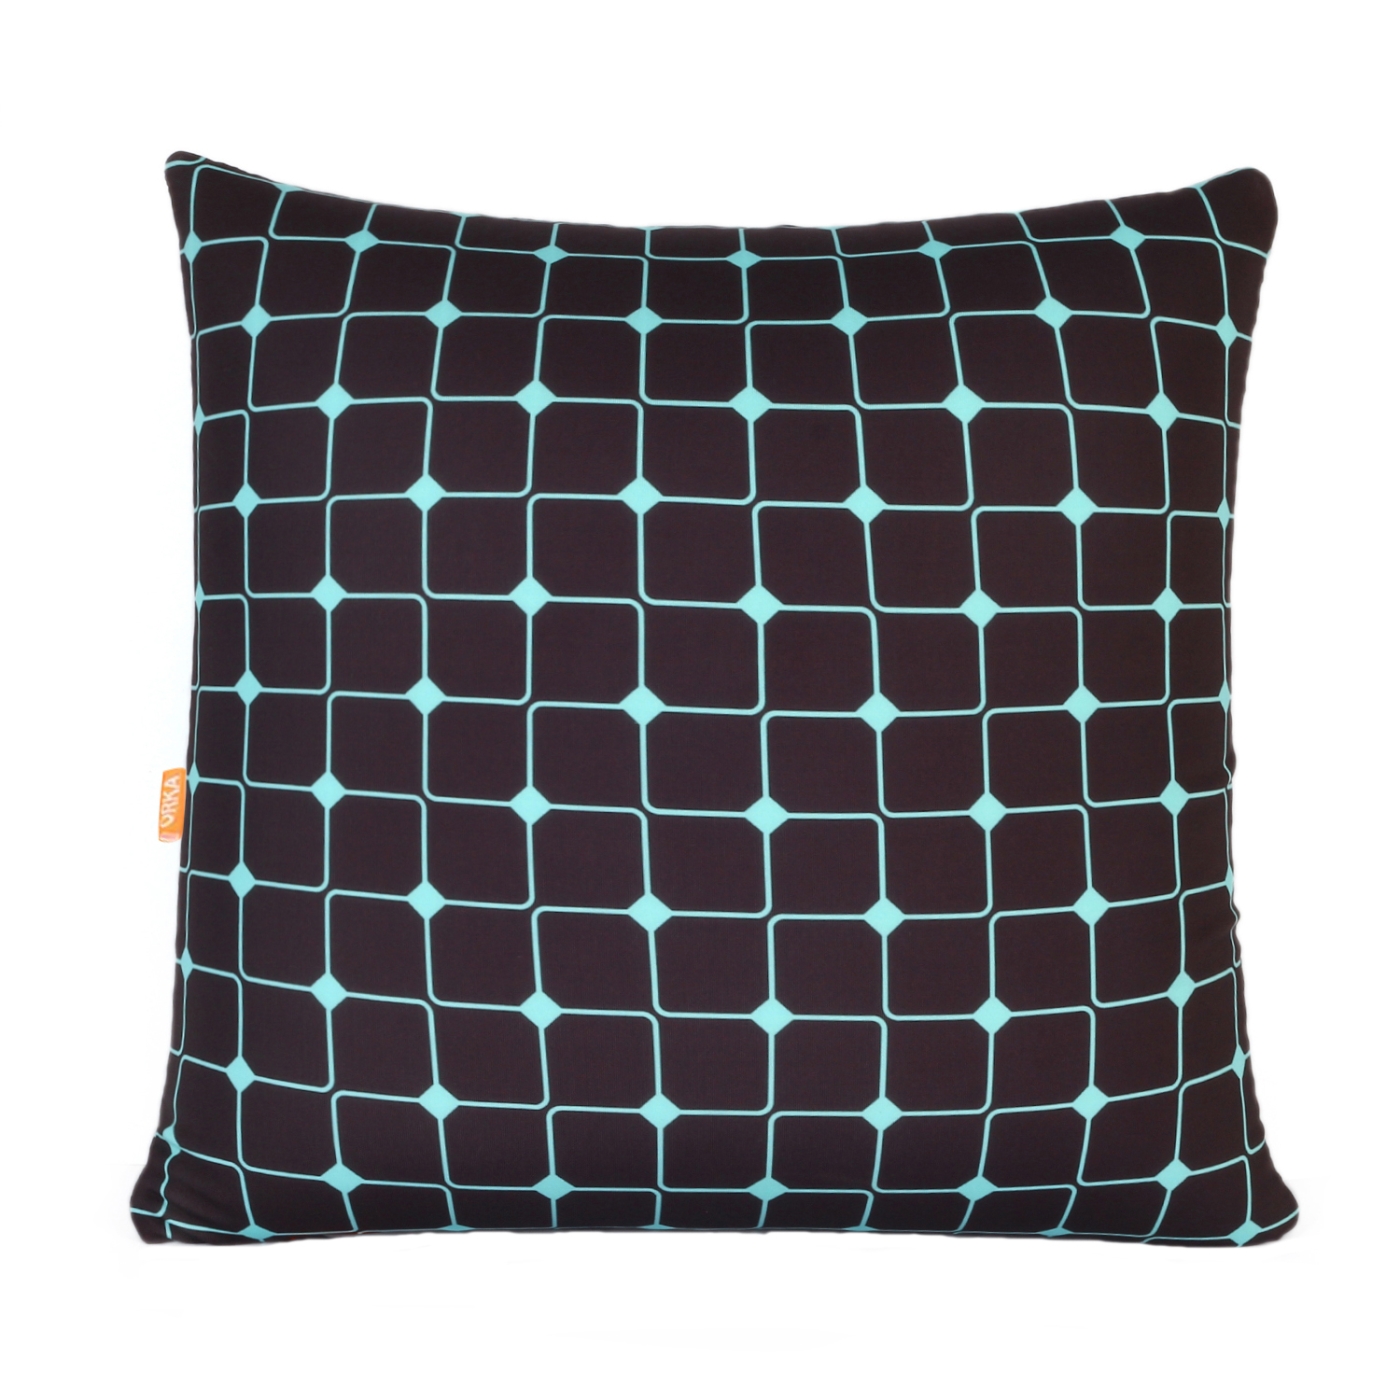 ORKA Digital Printed Spandex Filled With Microbeads Square Cushion 14 X 14 Inch -  Black, Teal  